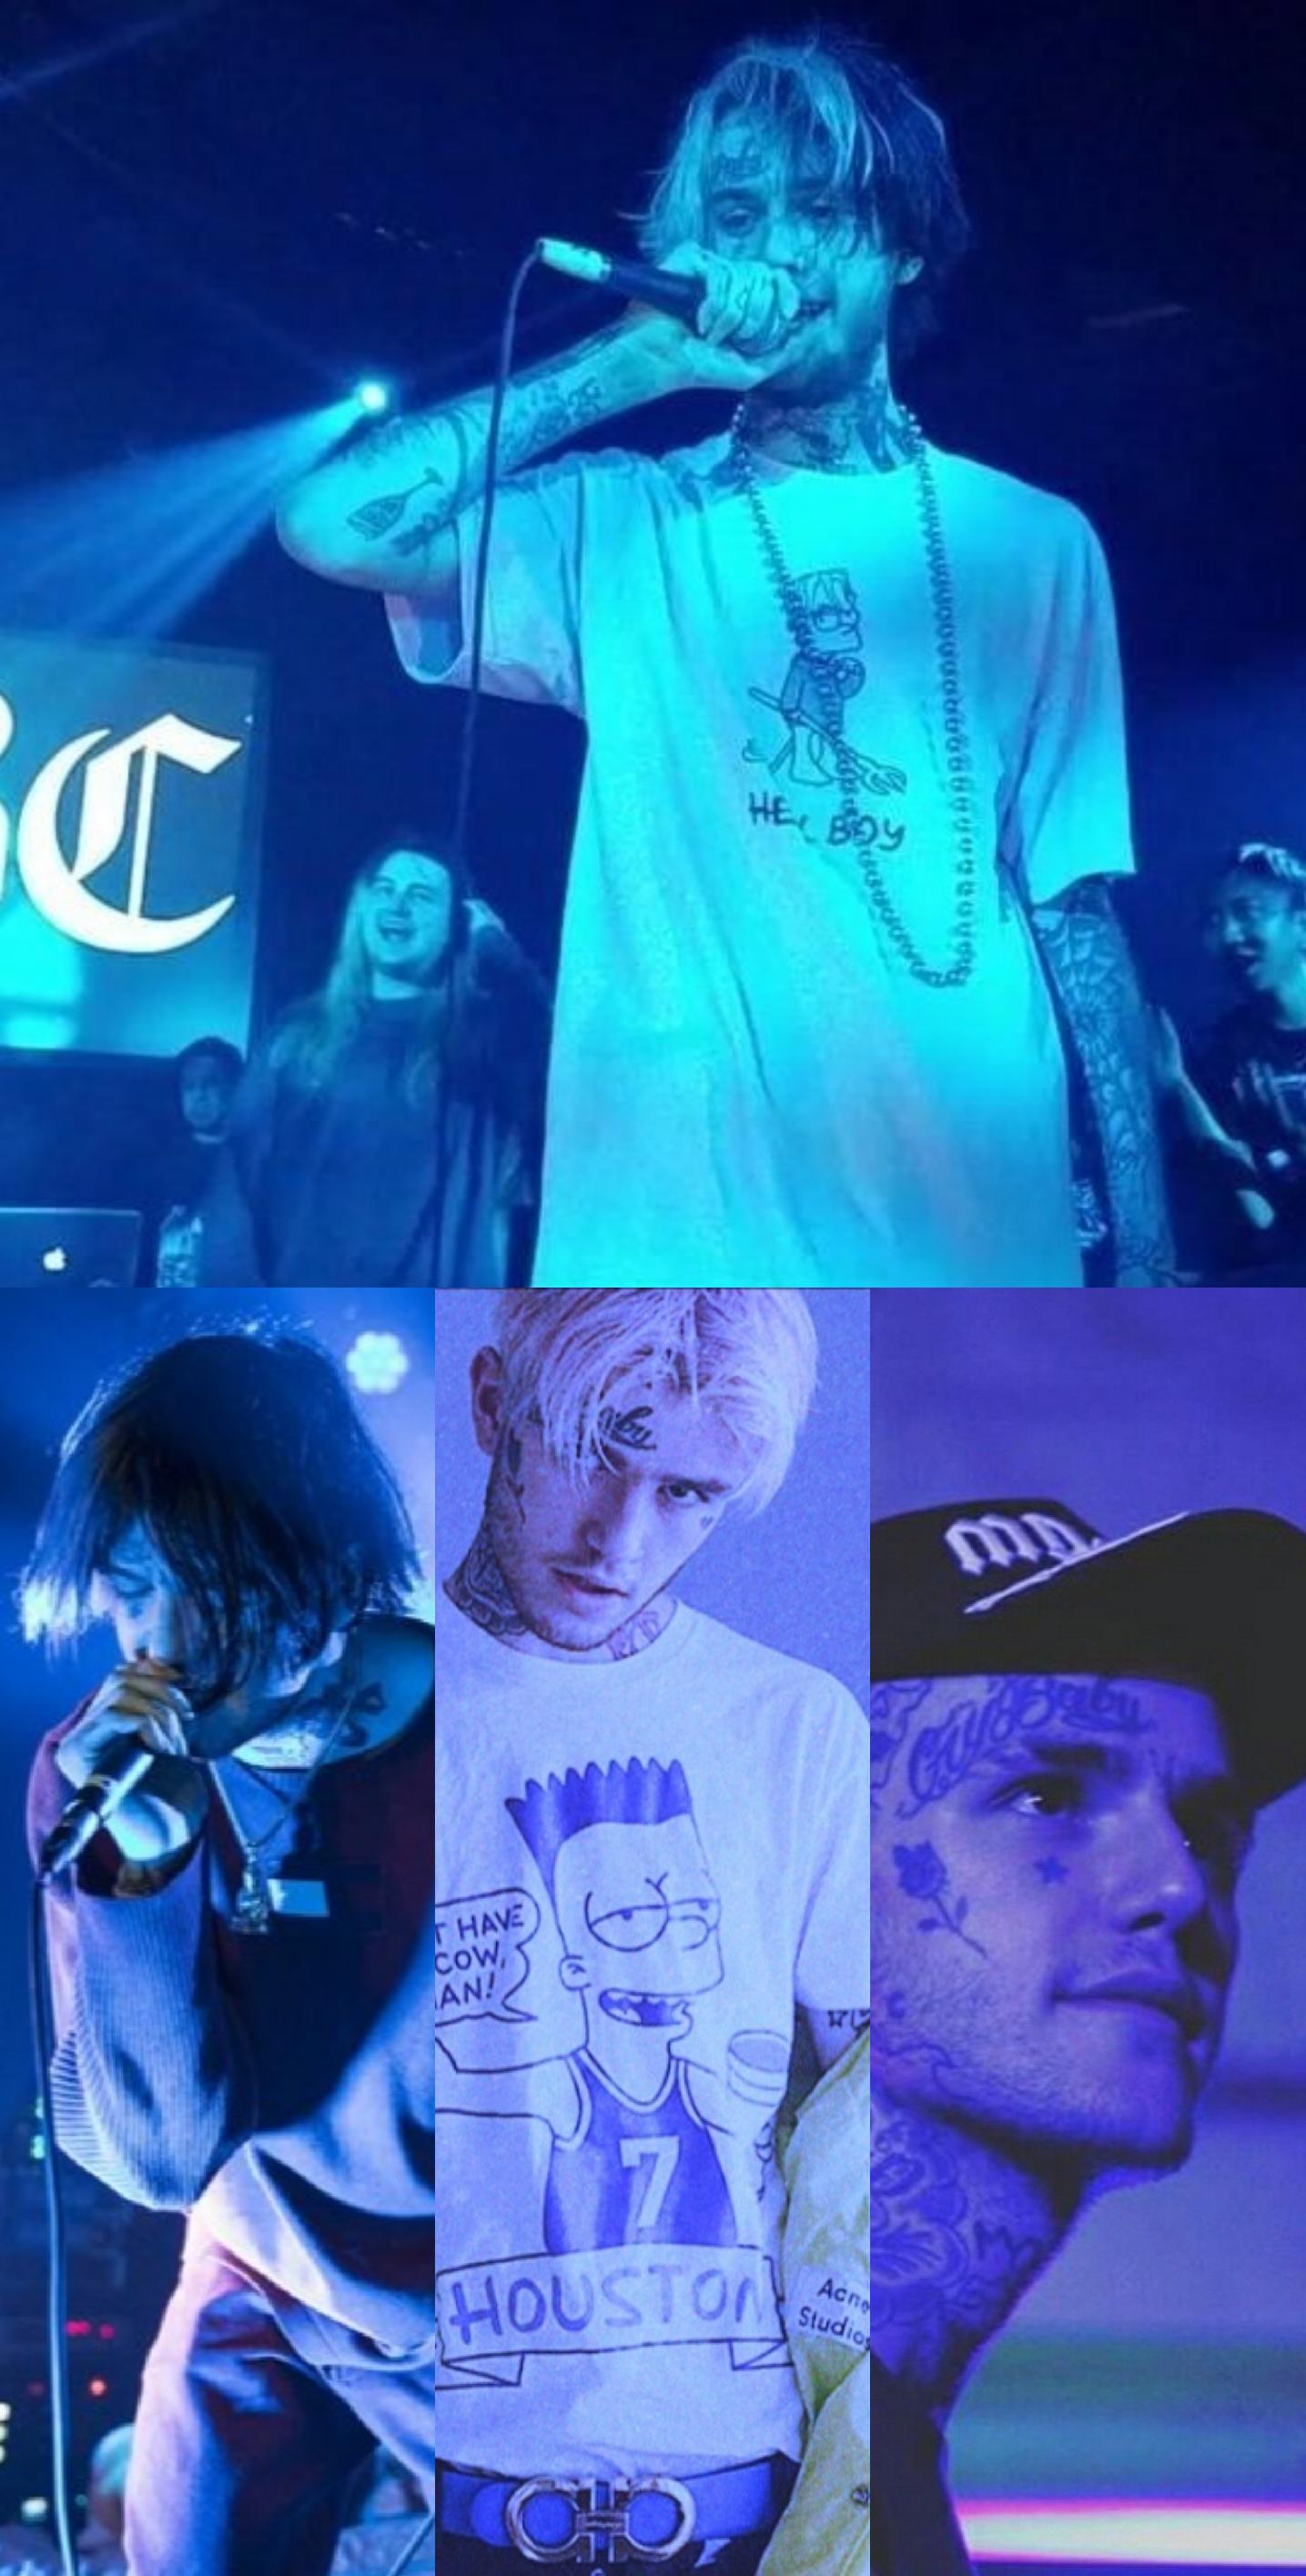 Lil Peep blue aesthetic wallpaper got the idea from someone else